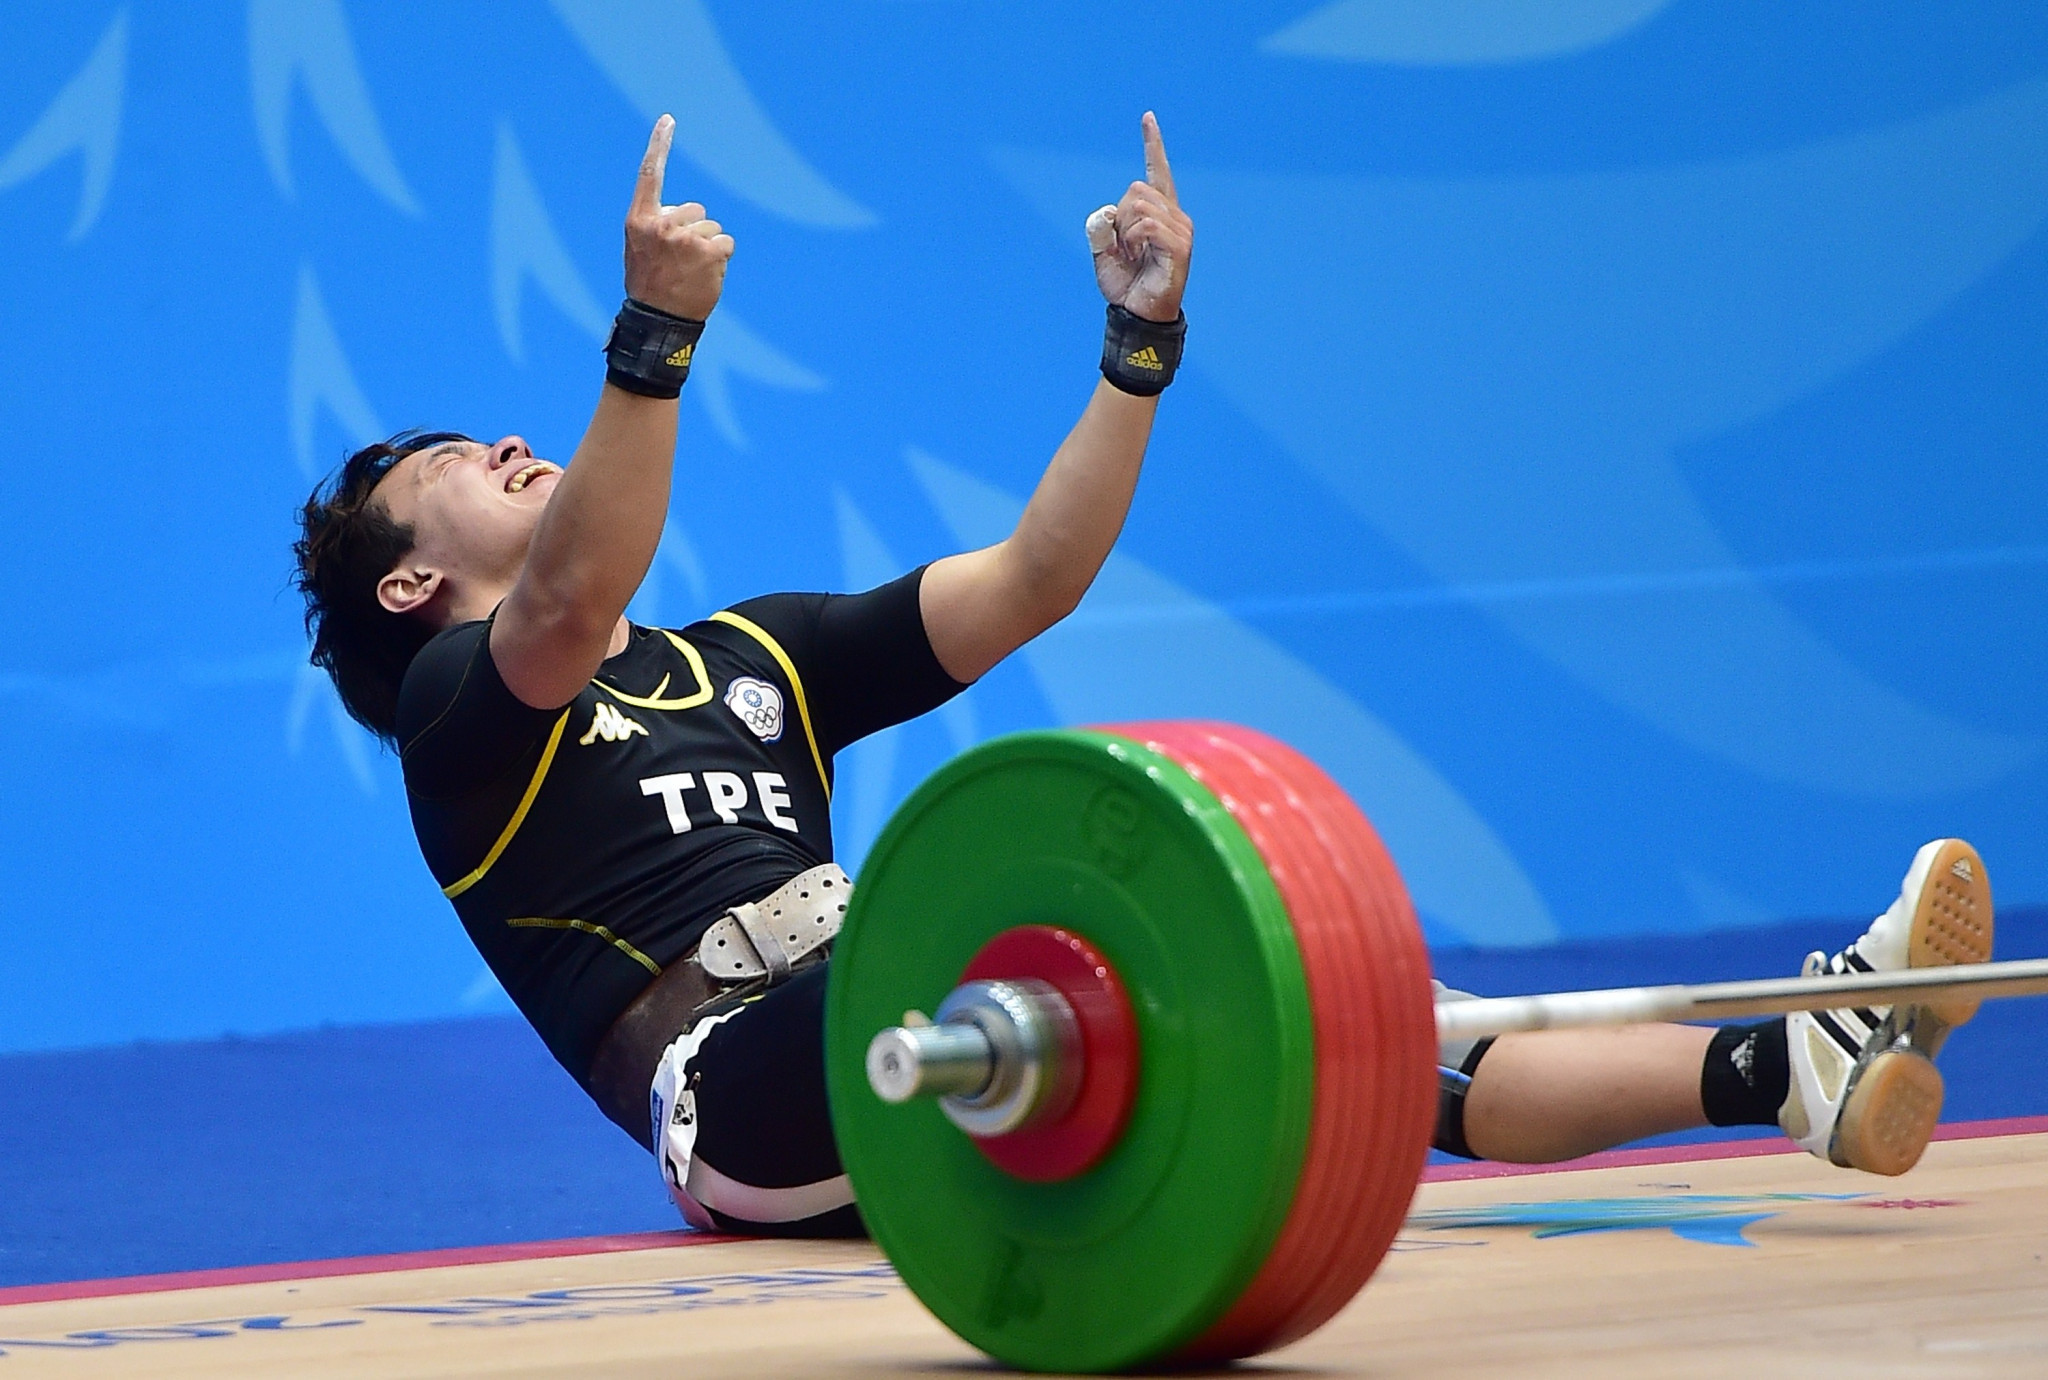 Chinese Taipei's former weightlifting world record holder Lin Tzu-chi has been banned for eight years after WADA appealed to the Court of Arbitration for Sport for the length of the suspension to be extended ©Getty Images